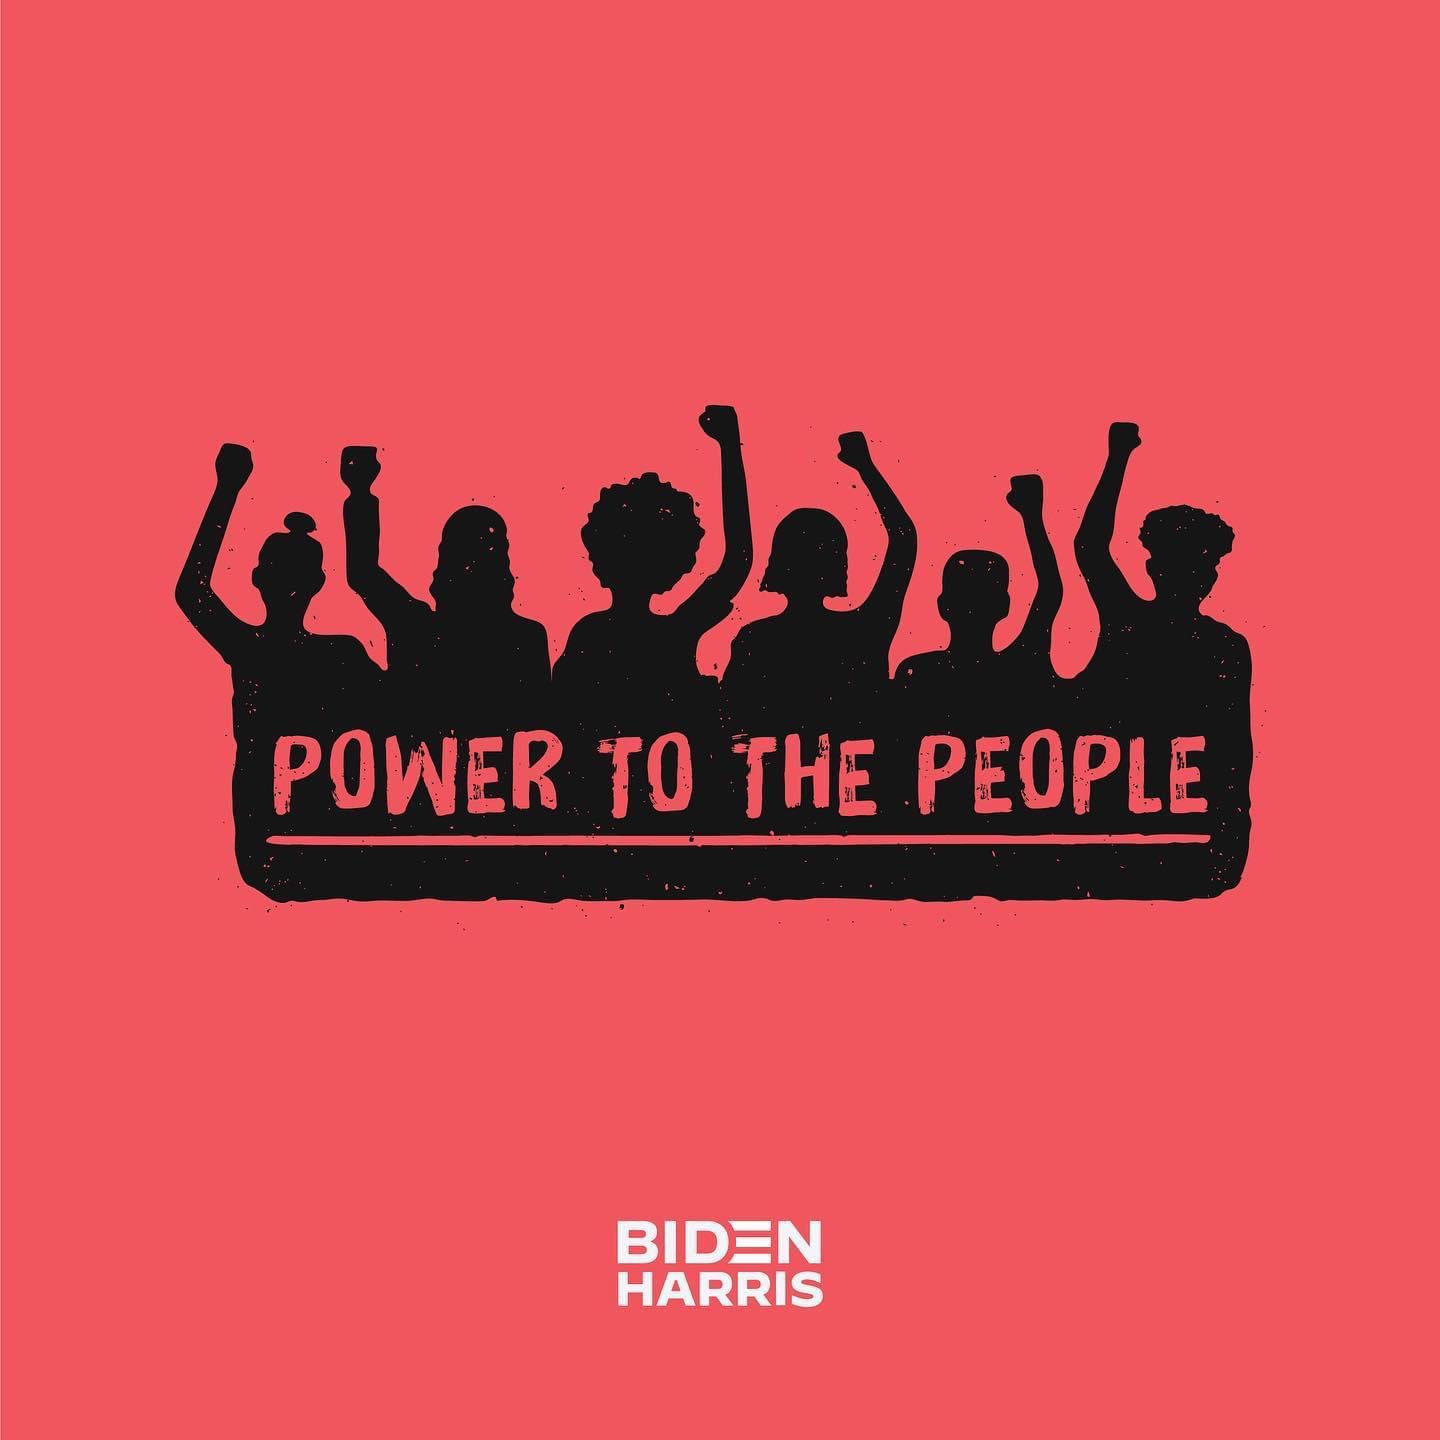 Power to the people! https://t.co/hGDOm2mrNr…